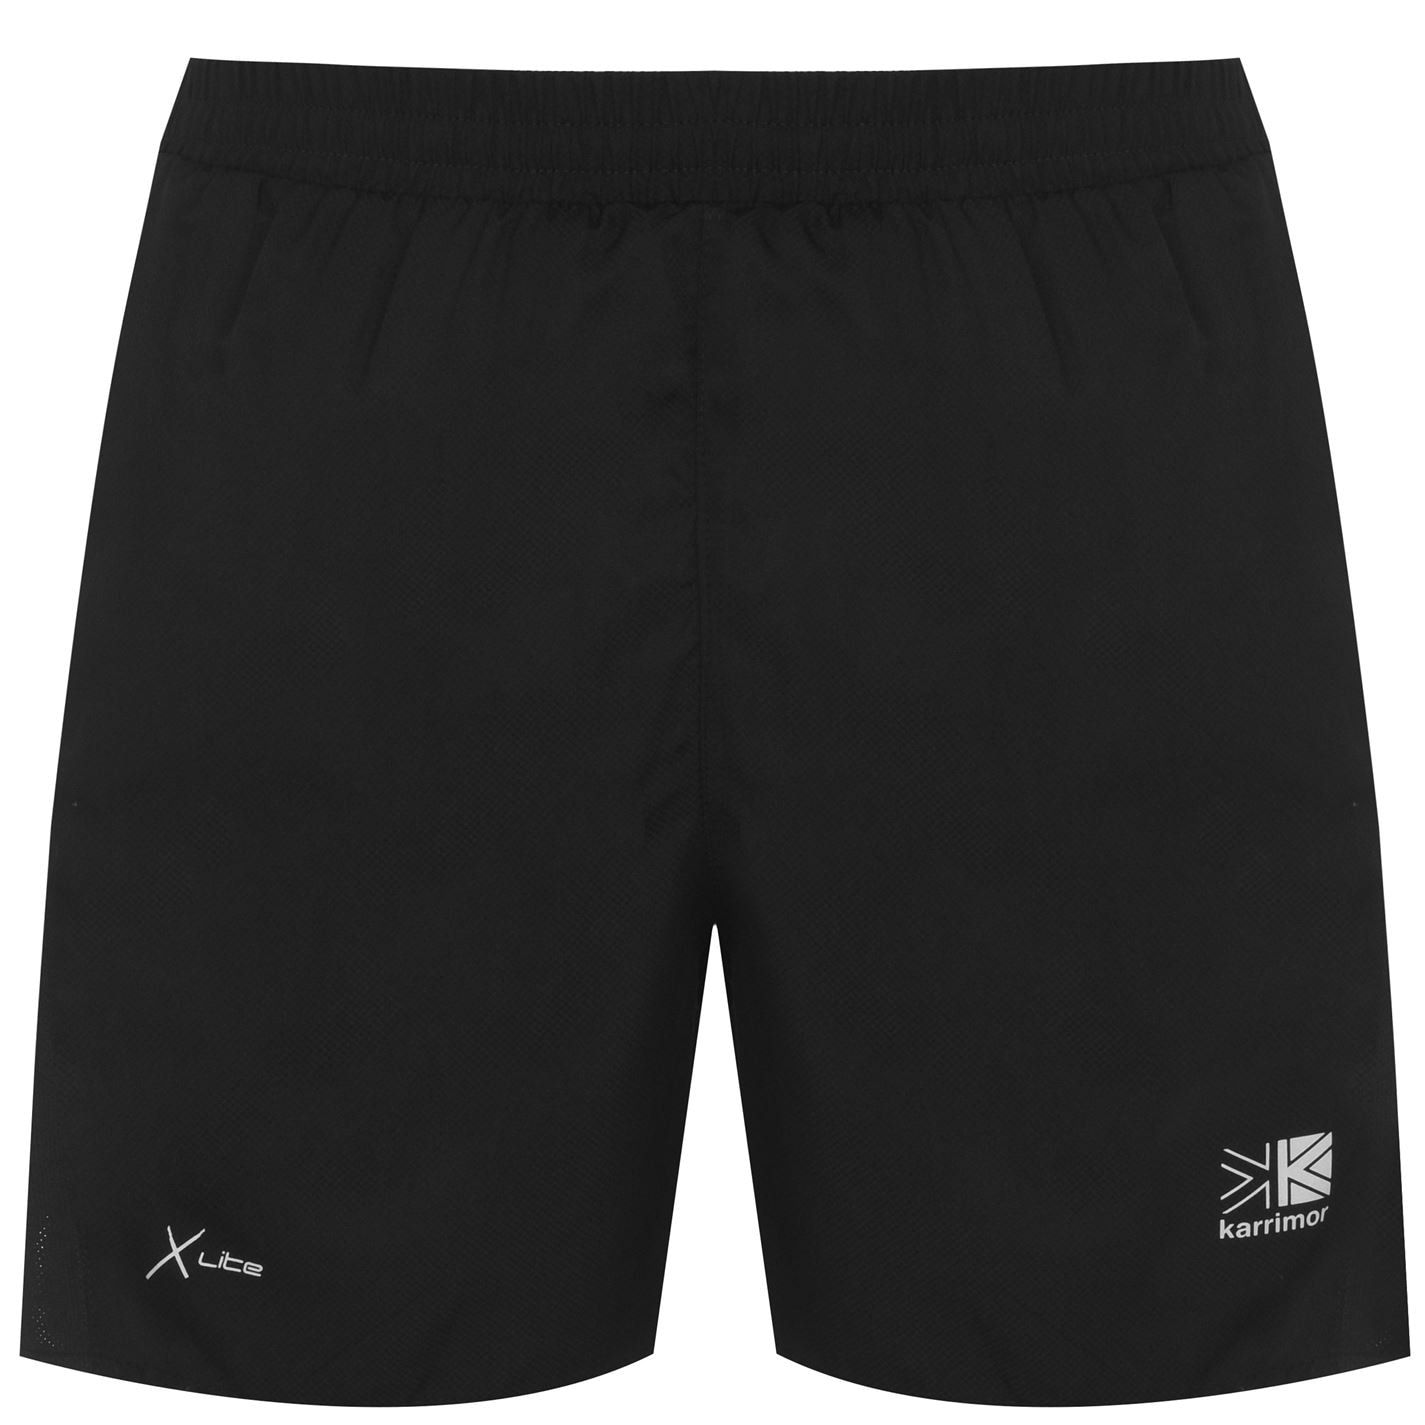 <strong> Karrimor 5inch Running Shorts Mens </strong><br><br> Conquer your next workout with the 5inch Running Shorts from Karrimor. Crafted with a lightweight and breathable fabric, these shorts deliver outstanding moisture management to help keep you cool and dry. Design is finished with elasticated waistband, internal drawstring tie, and reflective elements.<br>> Men's running shorts<br>> Elasticated waist with internal drawstring<br>> Internal briefs<br>> Secure zipped pocket to reverse<br>> Sweat wicking<br>> Reflective details<br>> 100% polyester<br>> Machine washable at 30 degrees<br>> Signature Karrimor branding